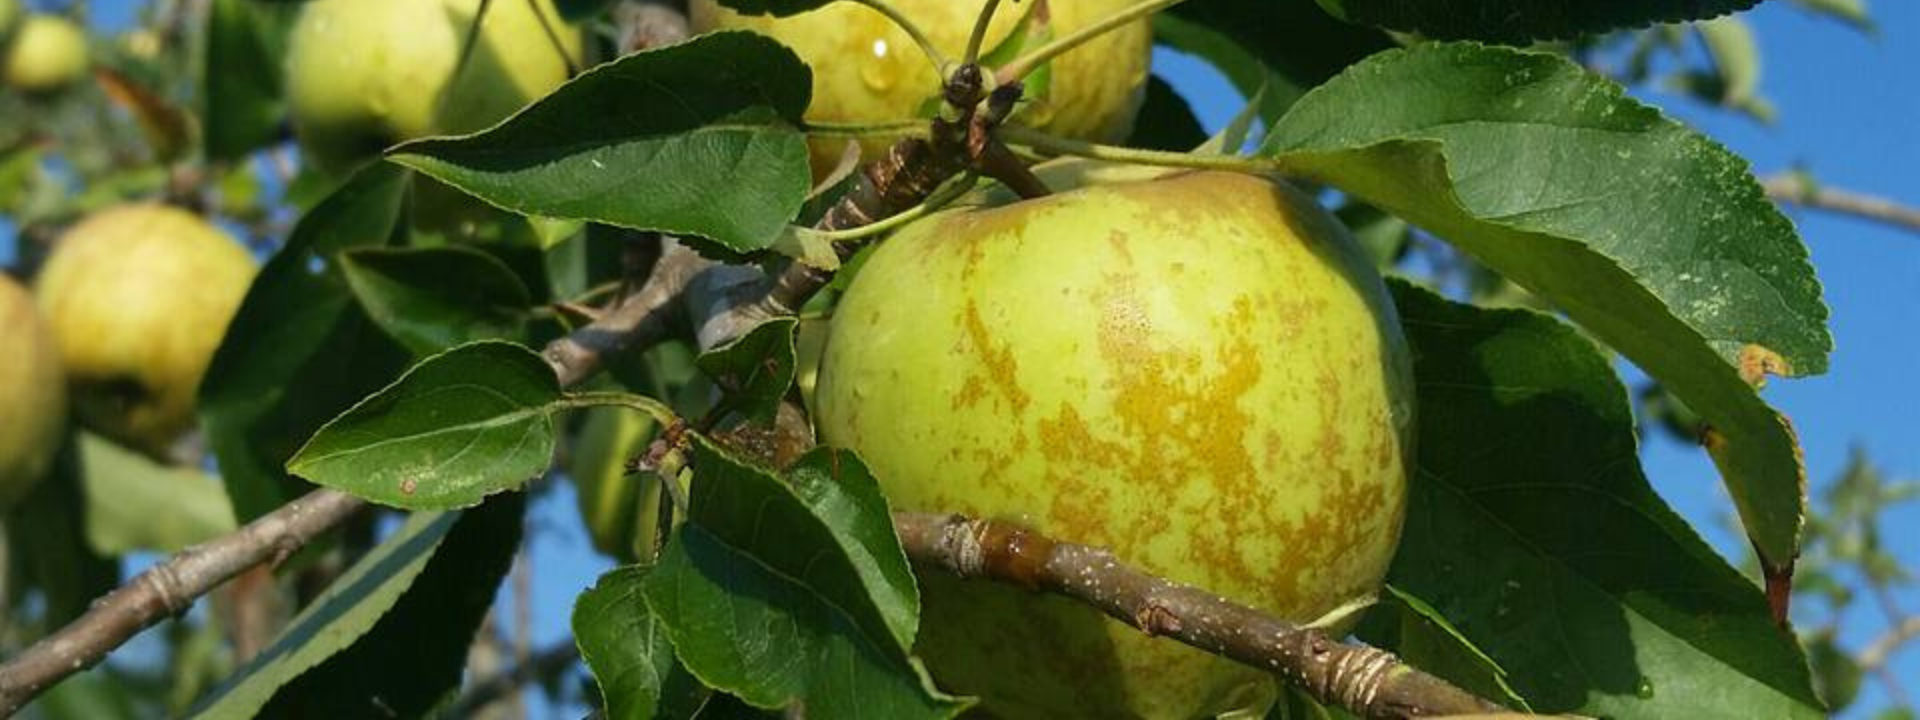 Join us for Heirloom Southern Apples: Past, Present and Future on March 23